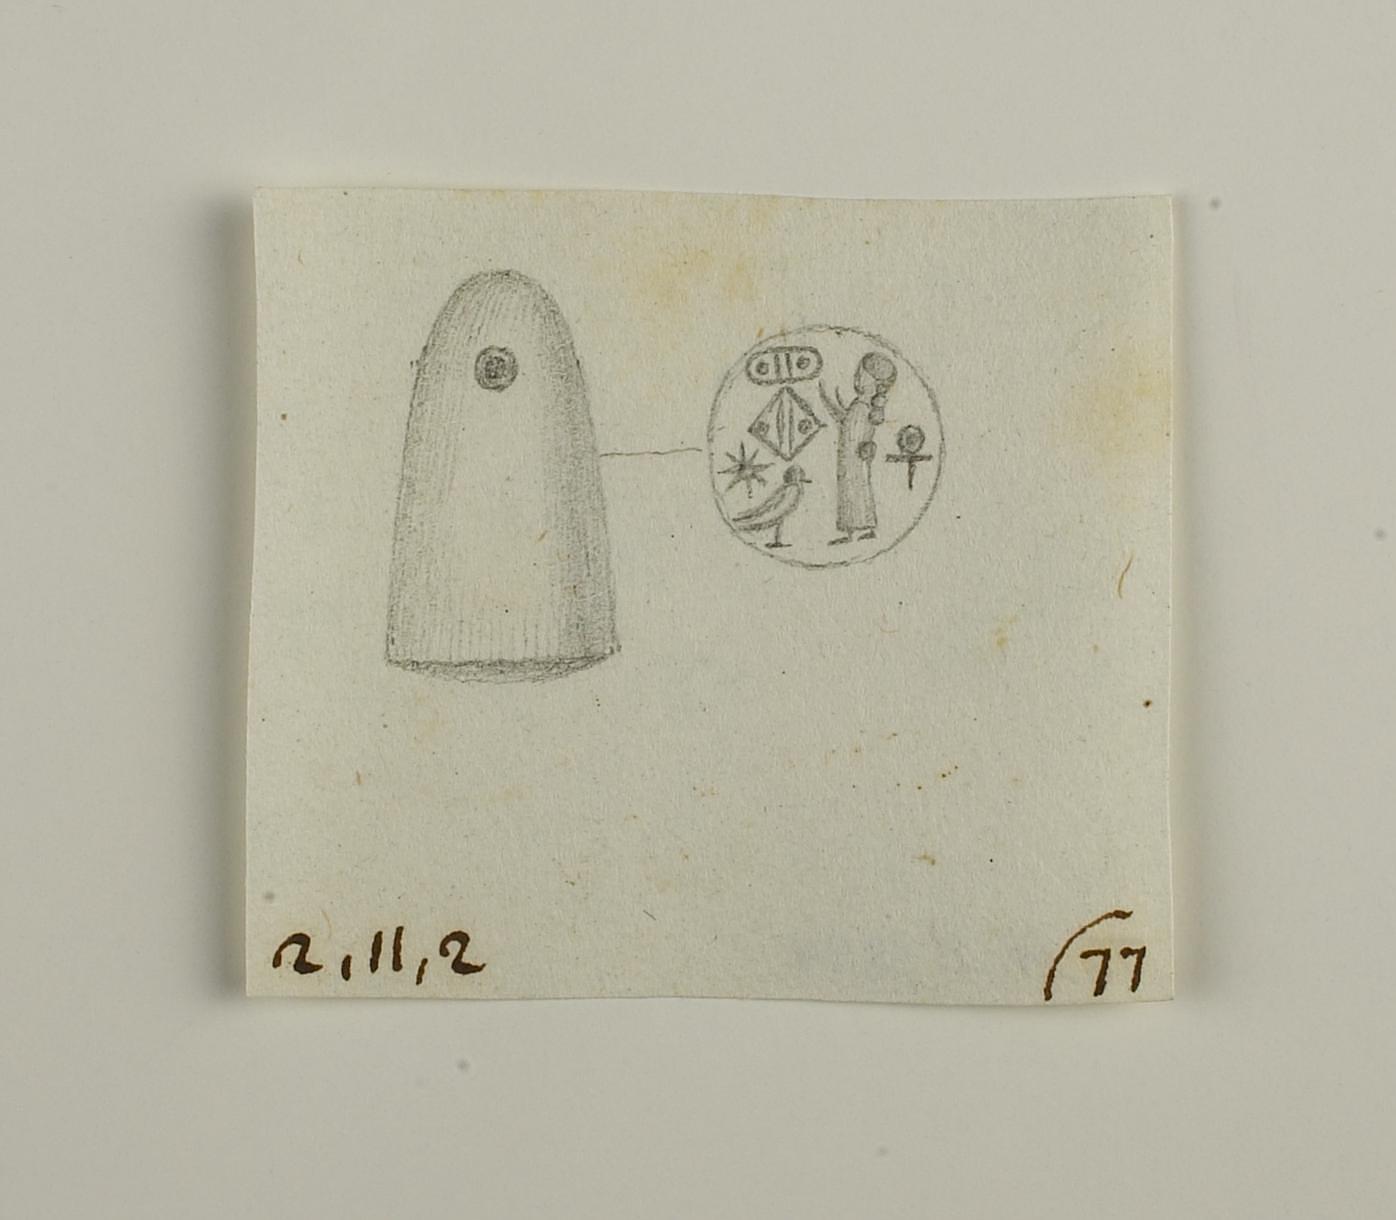 Seal stone, conic, D1294